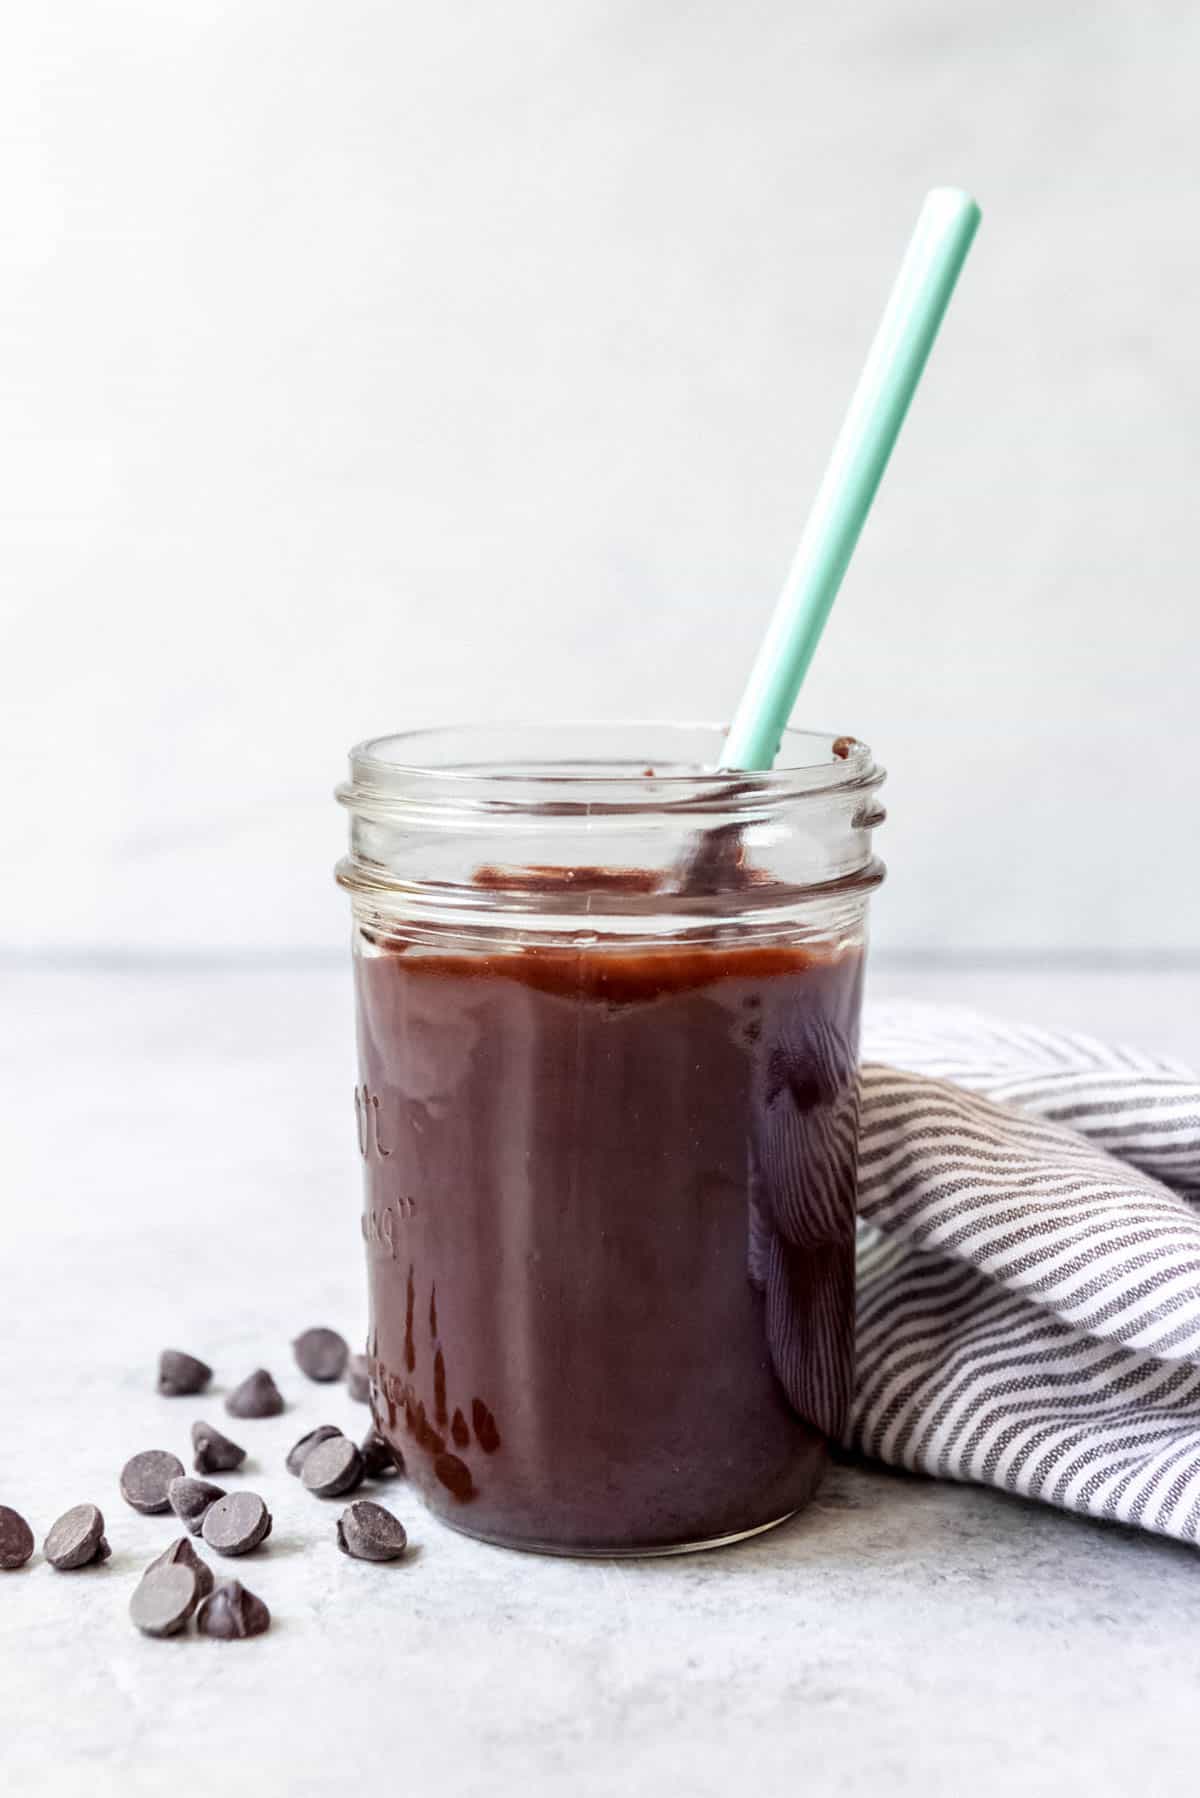 A jar of homemade hot fudge with chocolate chips and a striped linen napkin beside it.